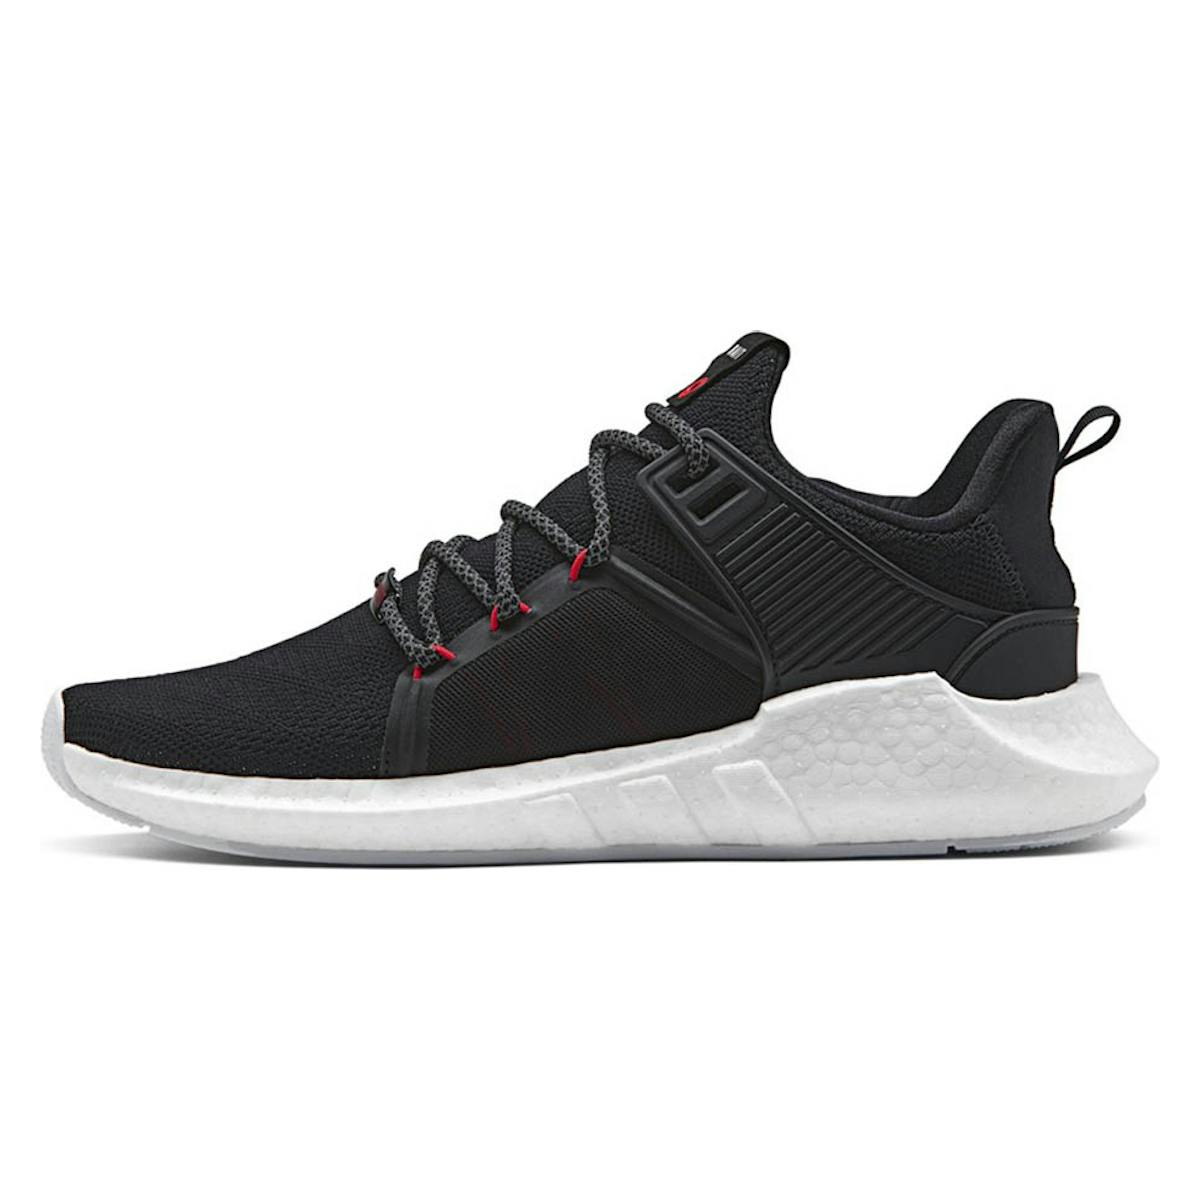 adidas Consortium x Bait EQT Support Future Boost Black R and D-Pack